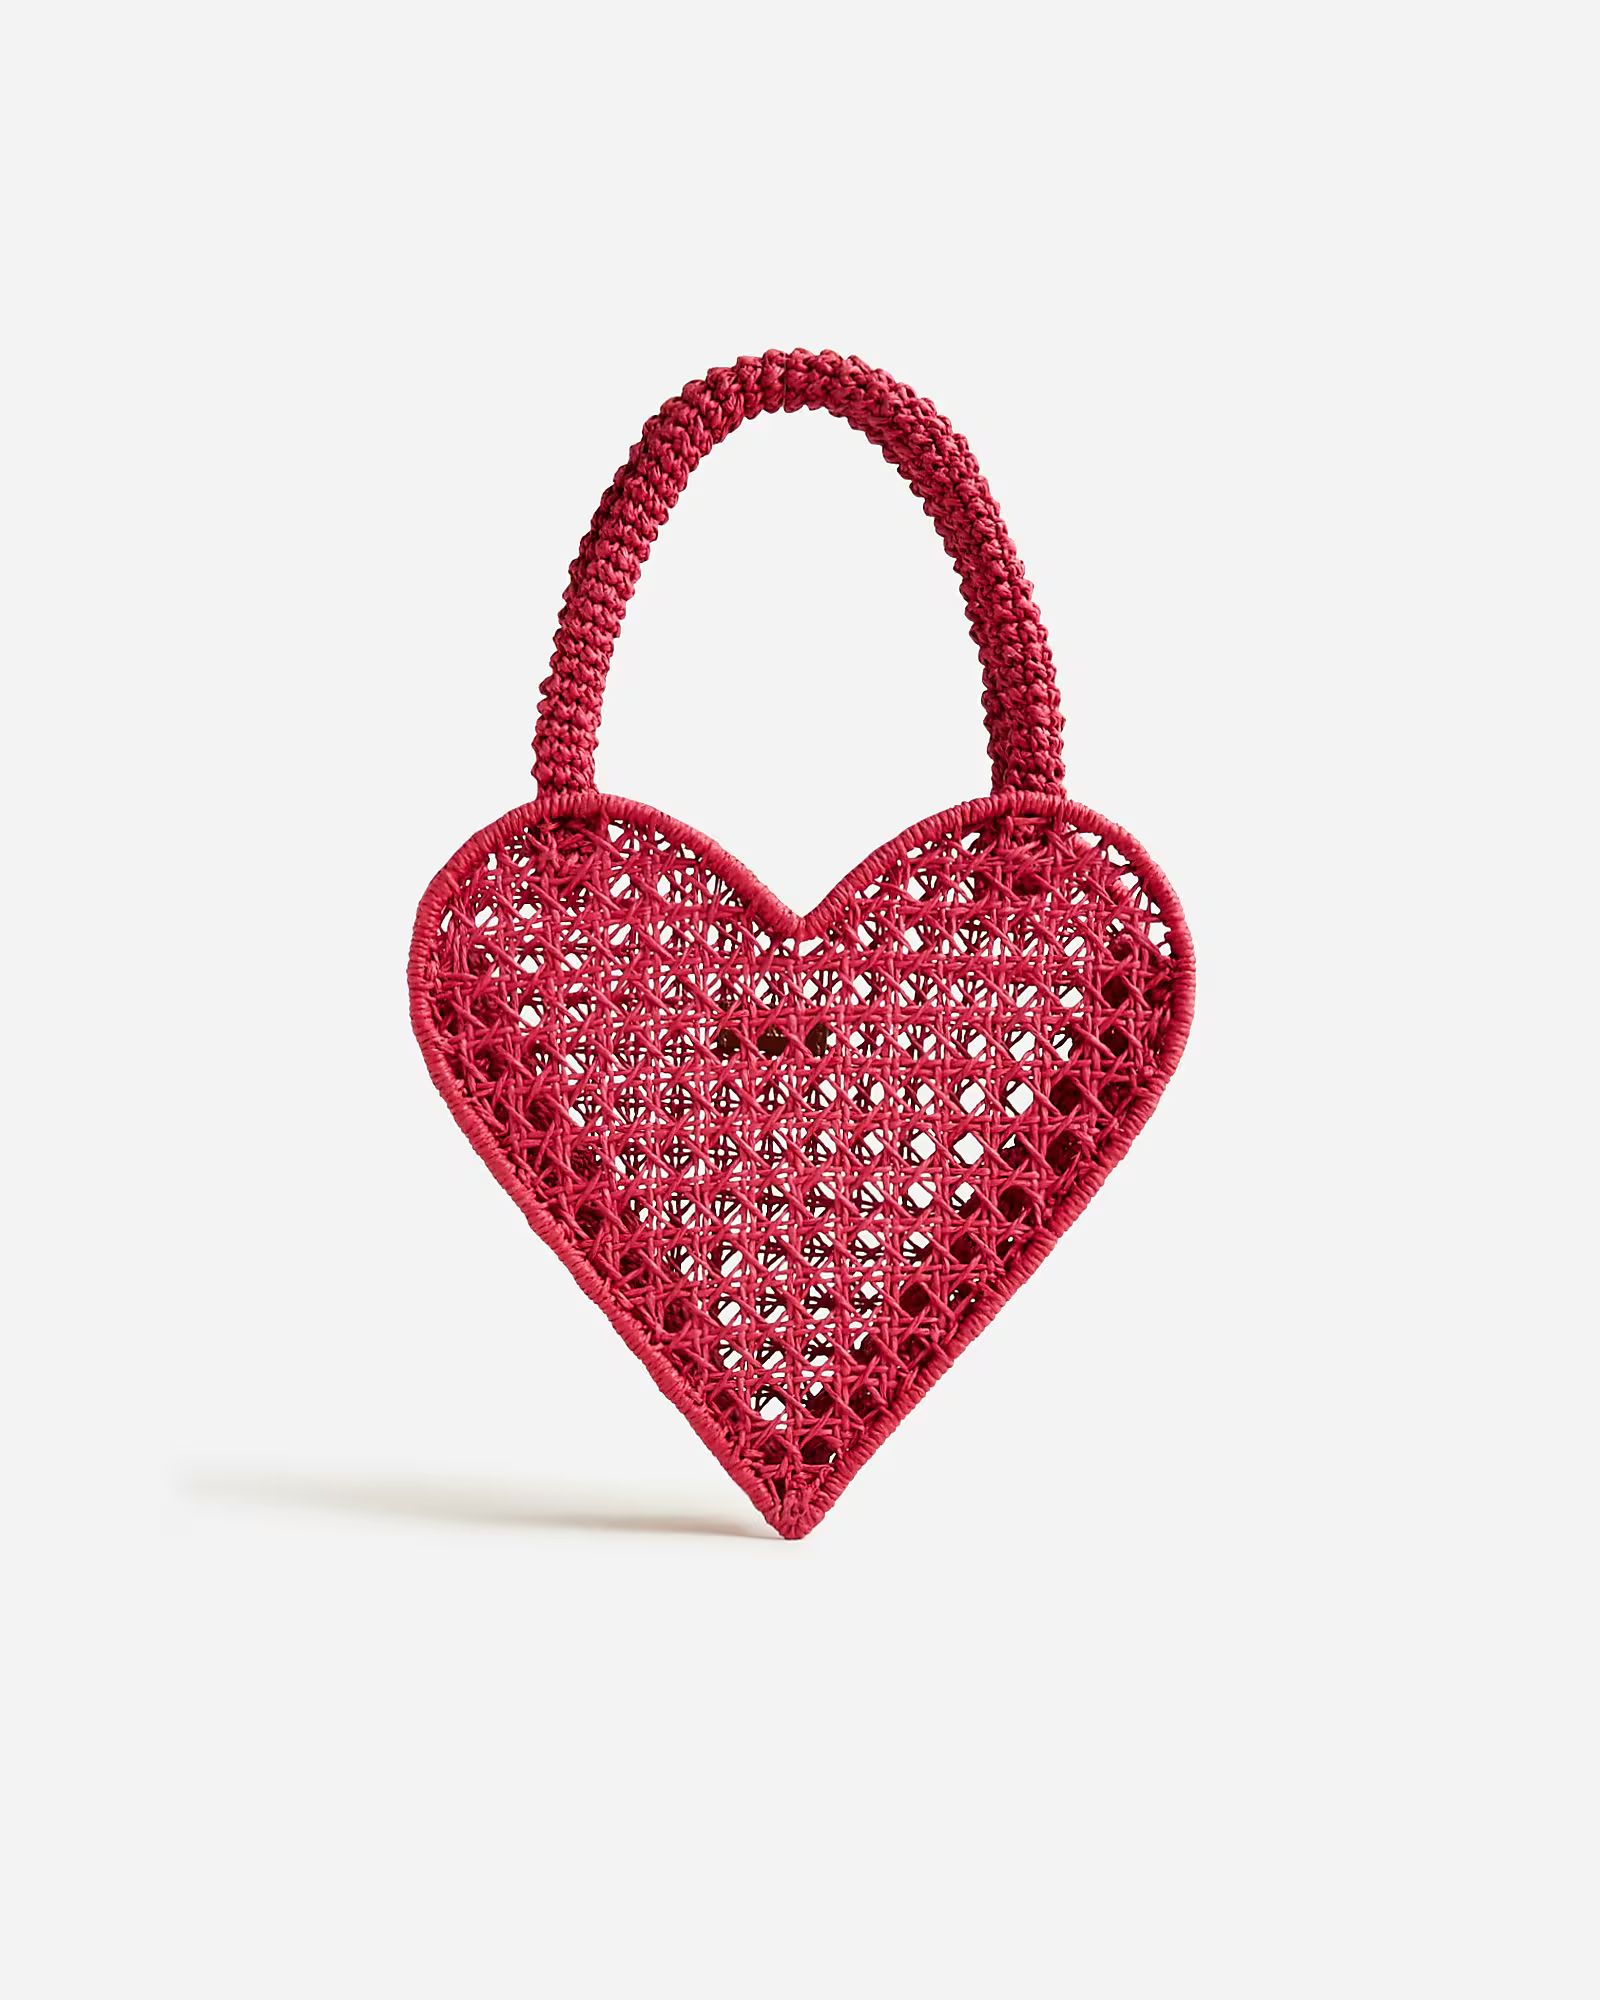 new5.0(1 REVIEWS)Small heart straw bag$98.0030% off full price with code SHOP30Vintage RedOne Siz... | J.Crew US